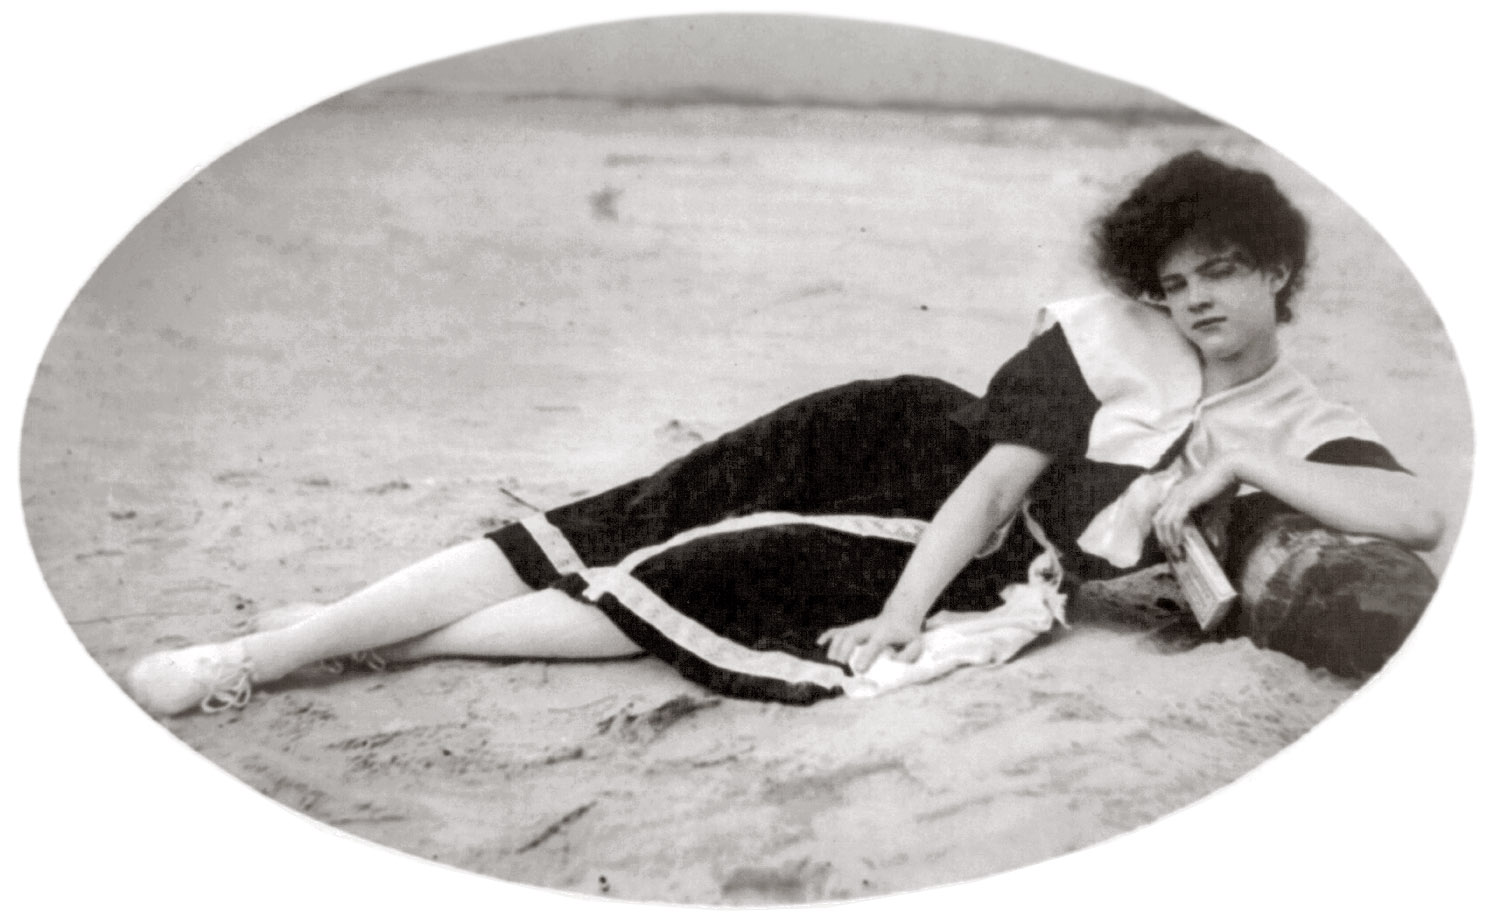 Woman in bathing suit lying on a unknown beach, sometime between 1910 and 1920. View full size.